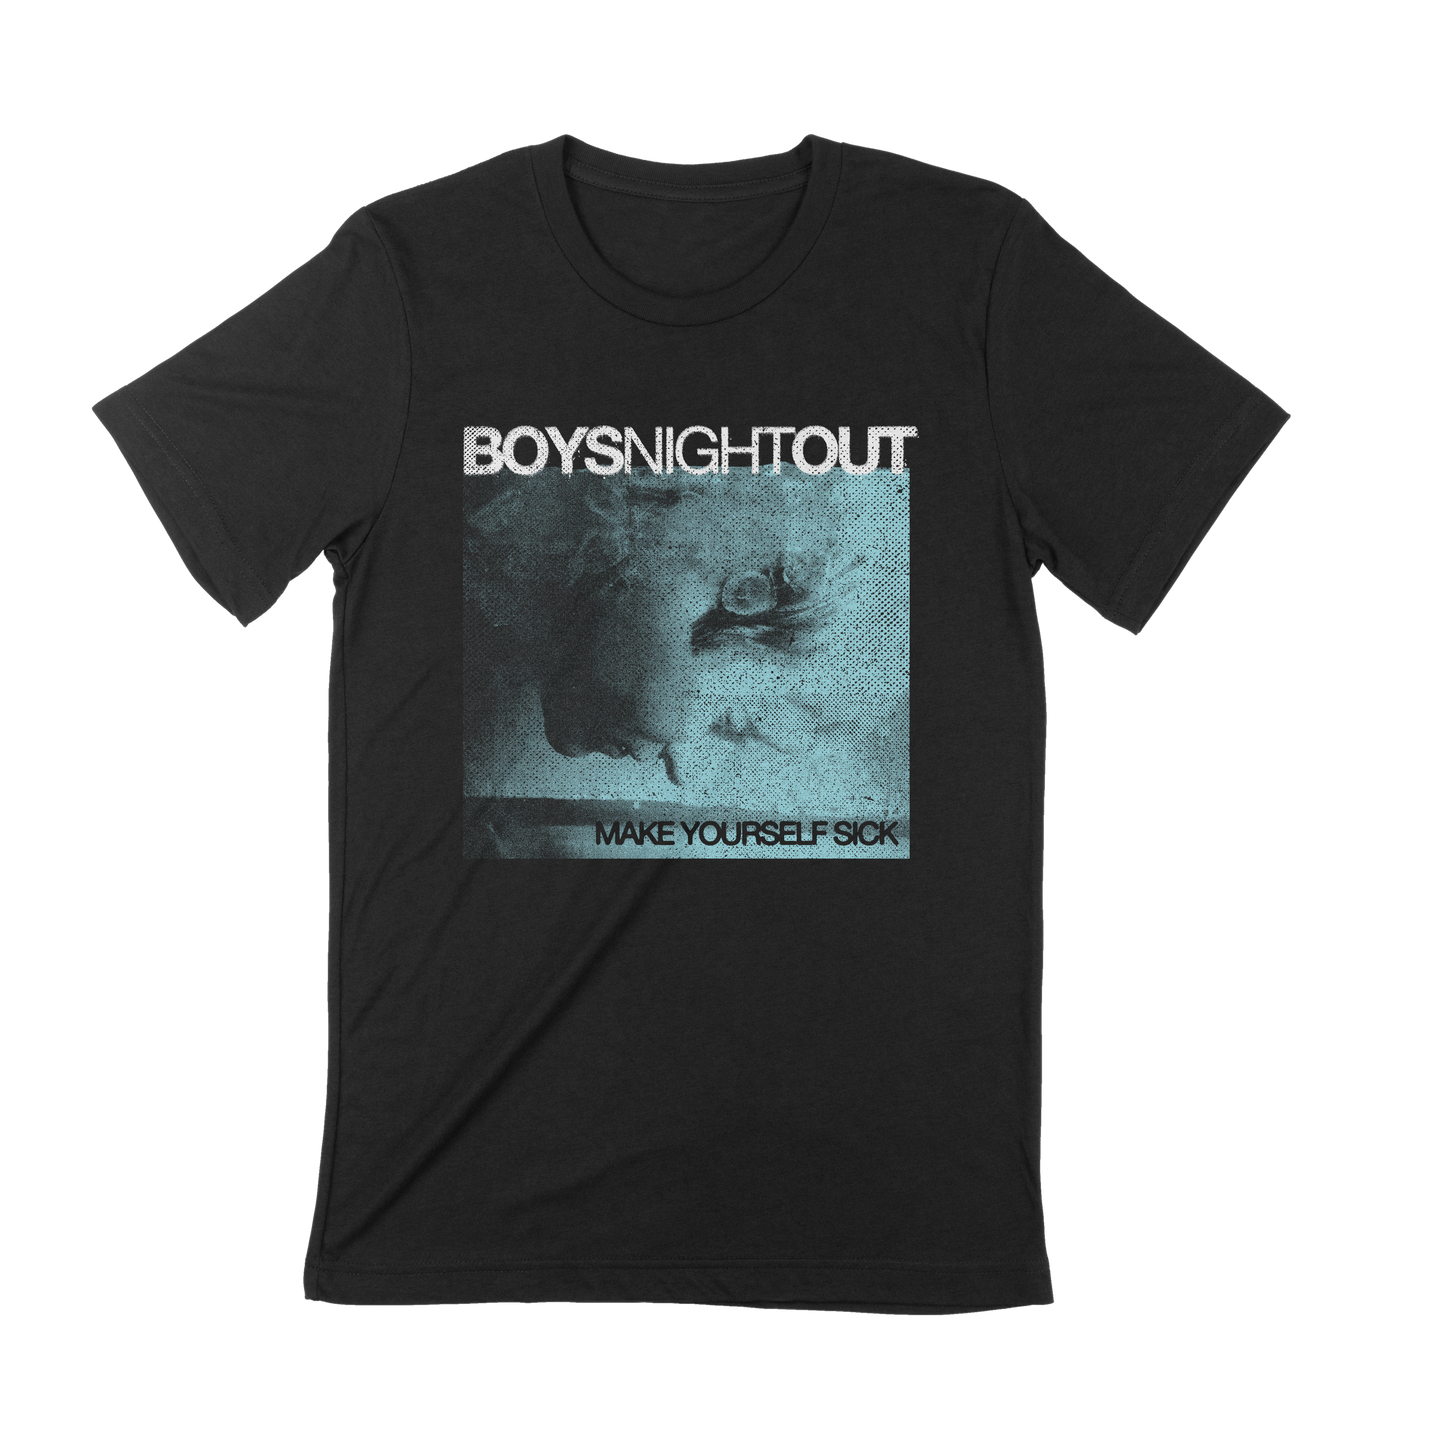 Boys Night Out -"Make Yourself Sick" T-Shirt